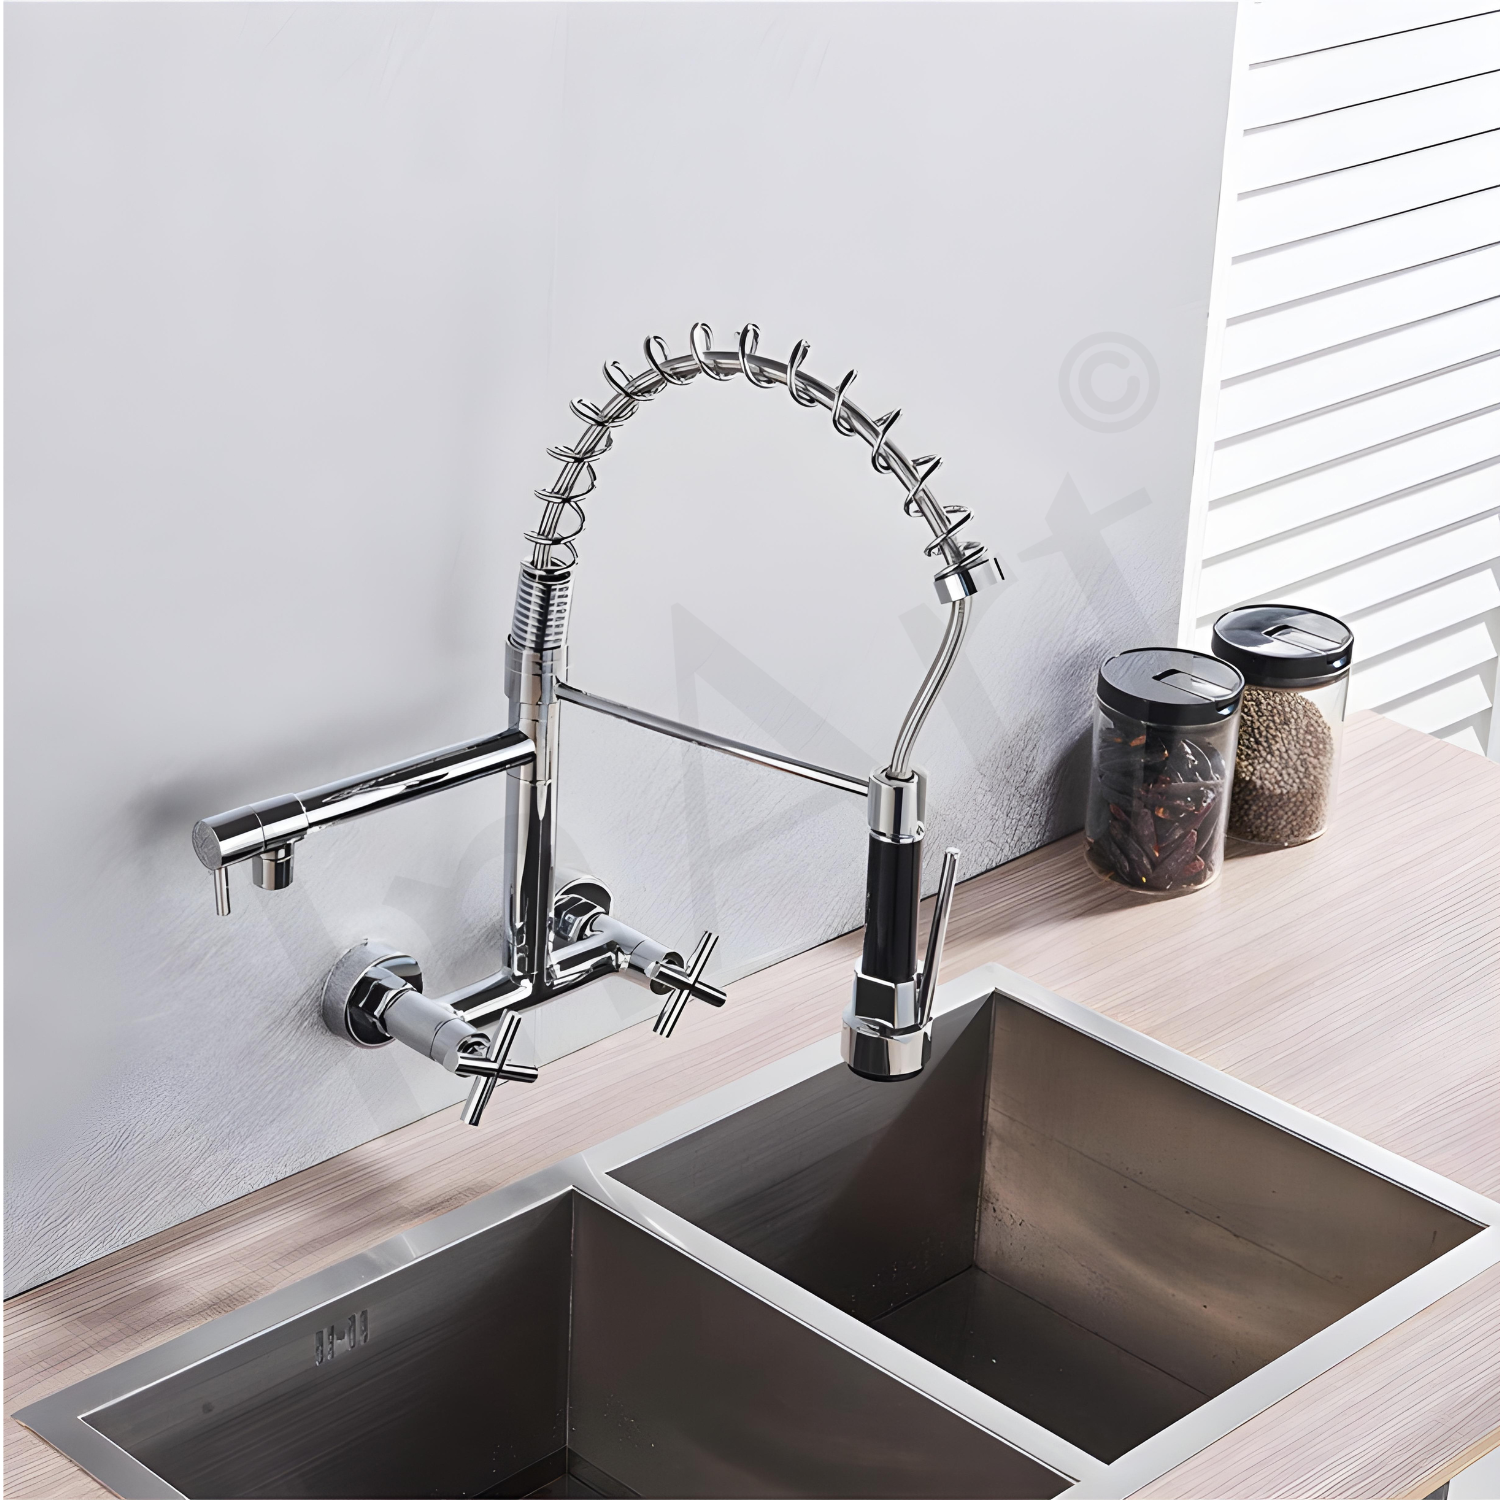 InArt Elite Luxury Kitchen Sink Tap | Wall-Mounted, 360° Pull-Down Sprayer, Chrome Finish | Multi-Function Spray Head and Hot & Cold Functionality - InArt-Studio